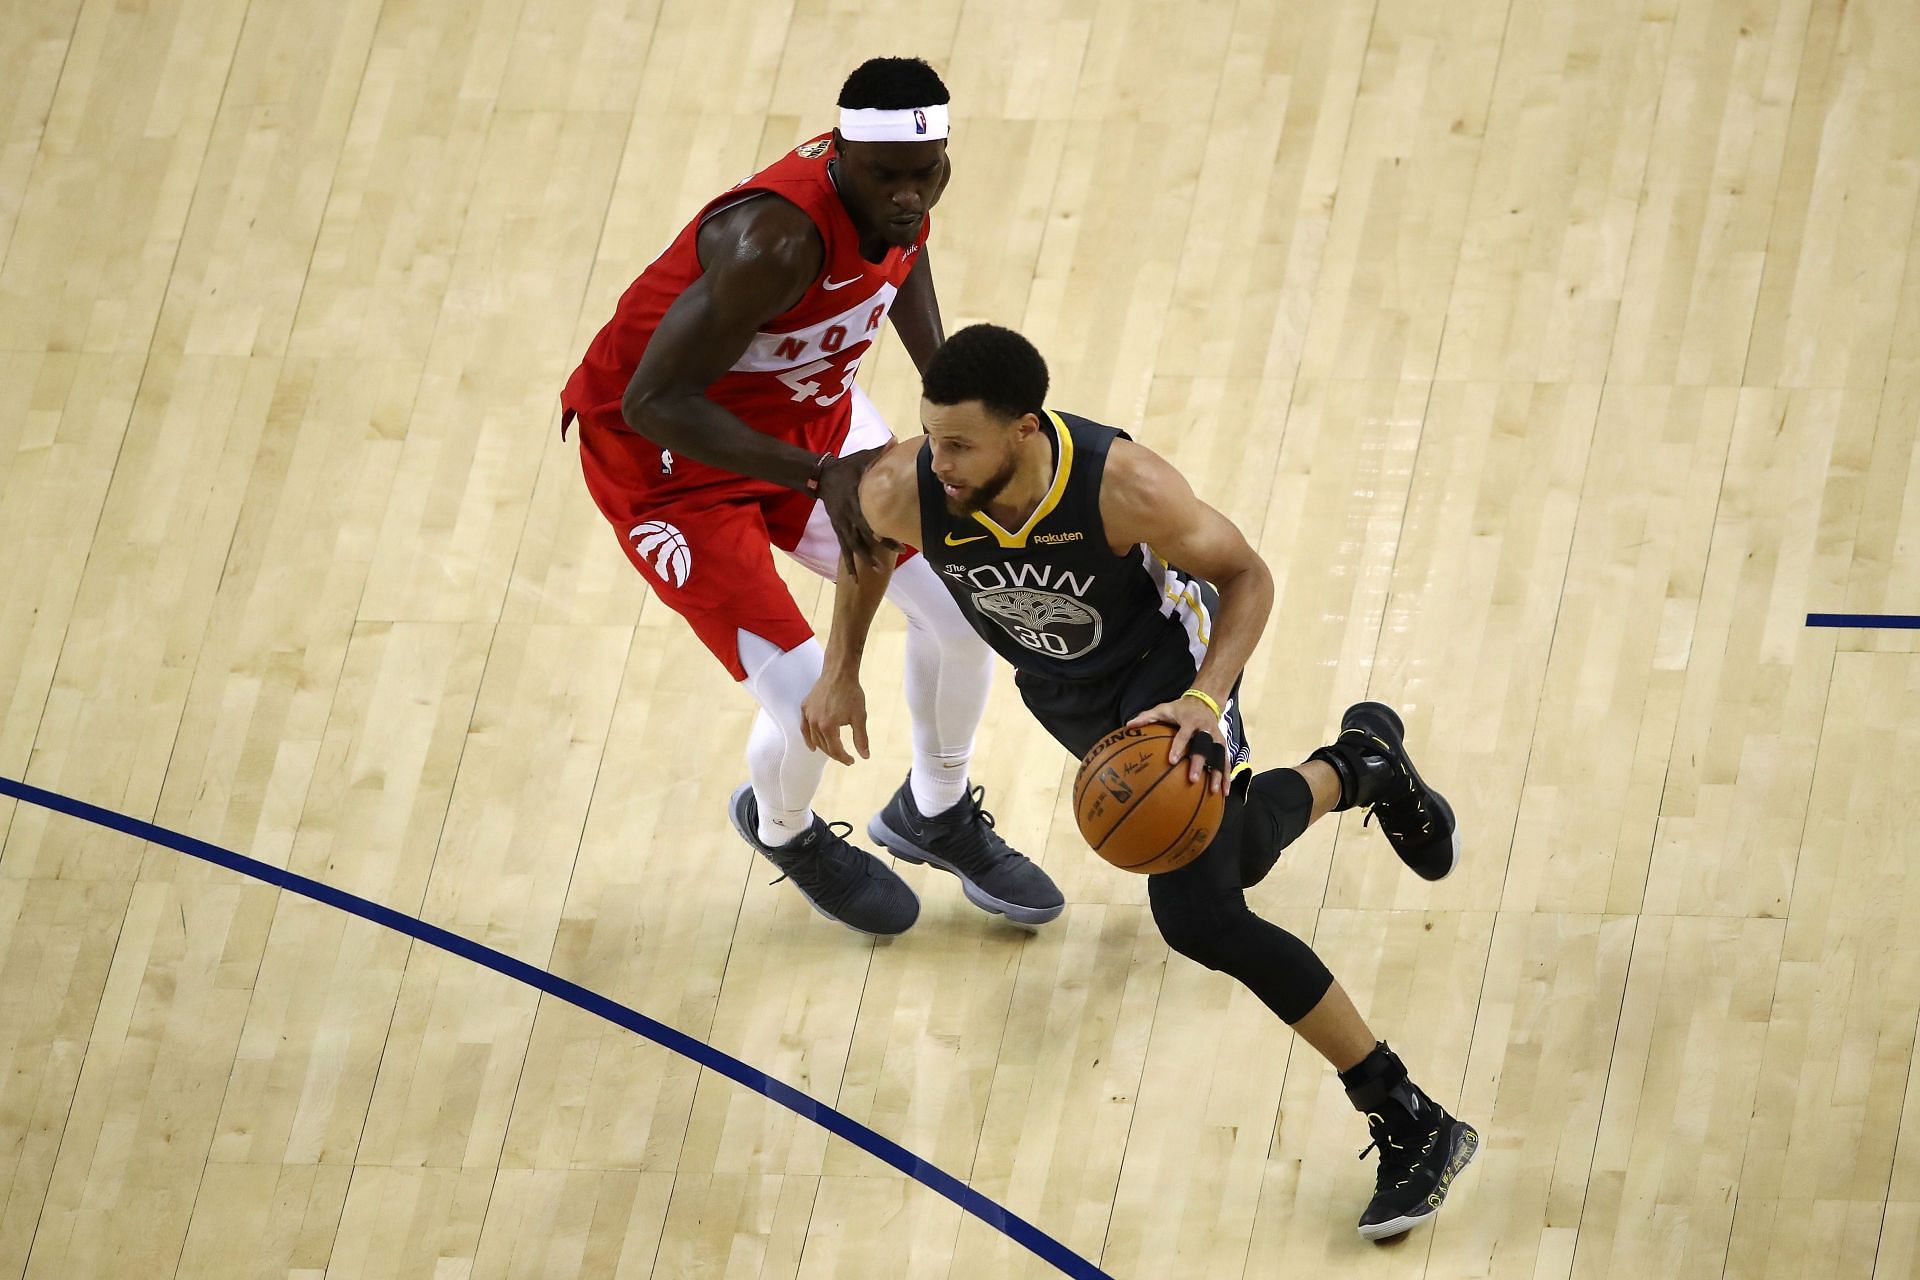 Steph Curry of the Golden State Warriors against Pascal Siakam of the Toronto Raptors during the 2019 NBA Finals